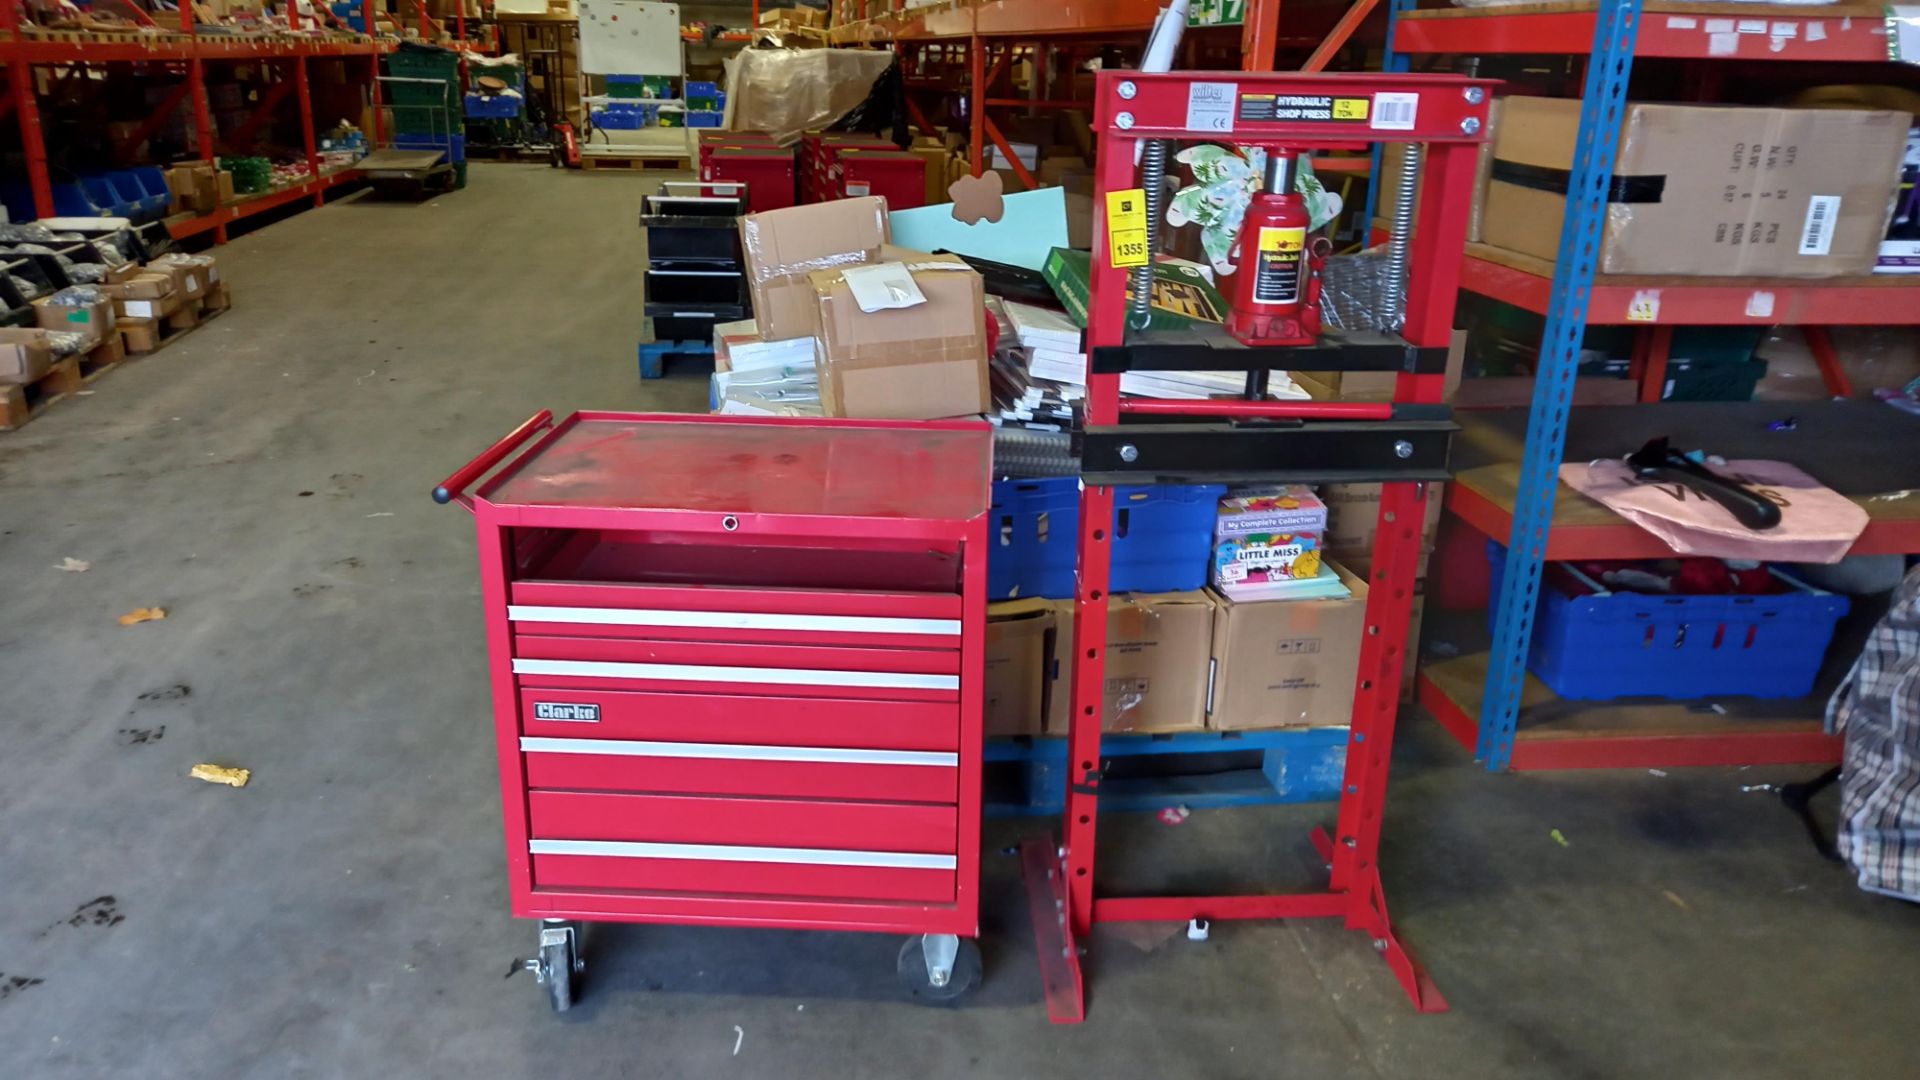 1 X 12 TONNE HYDRAULIC PRESS AND 1 X CLARKE MOBILE 5 DRAWER TROLLEY (PLEASE NOTE 1 DRAWER IS